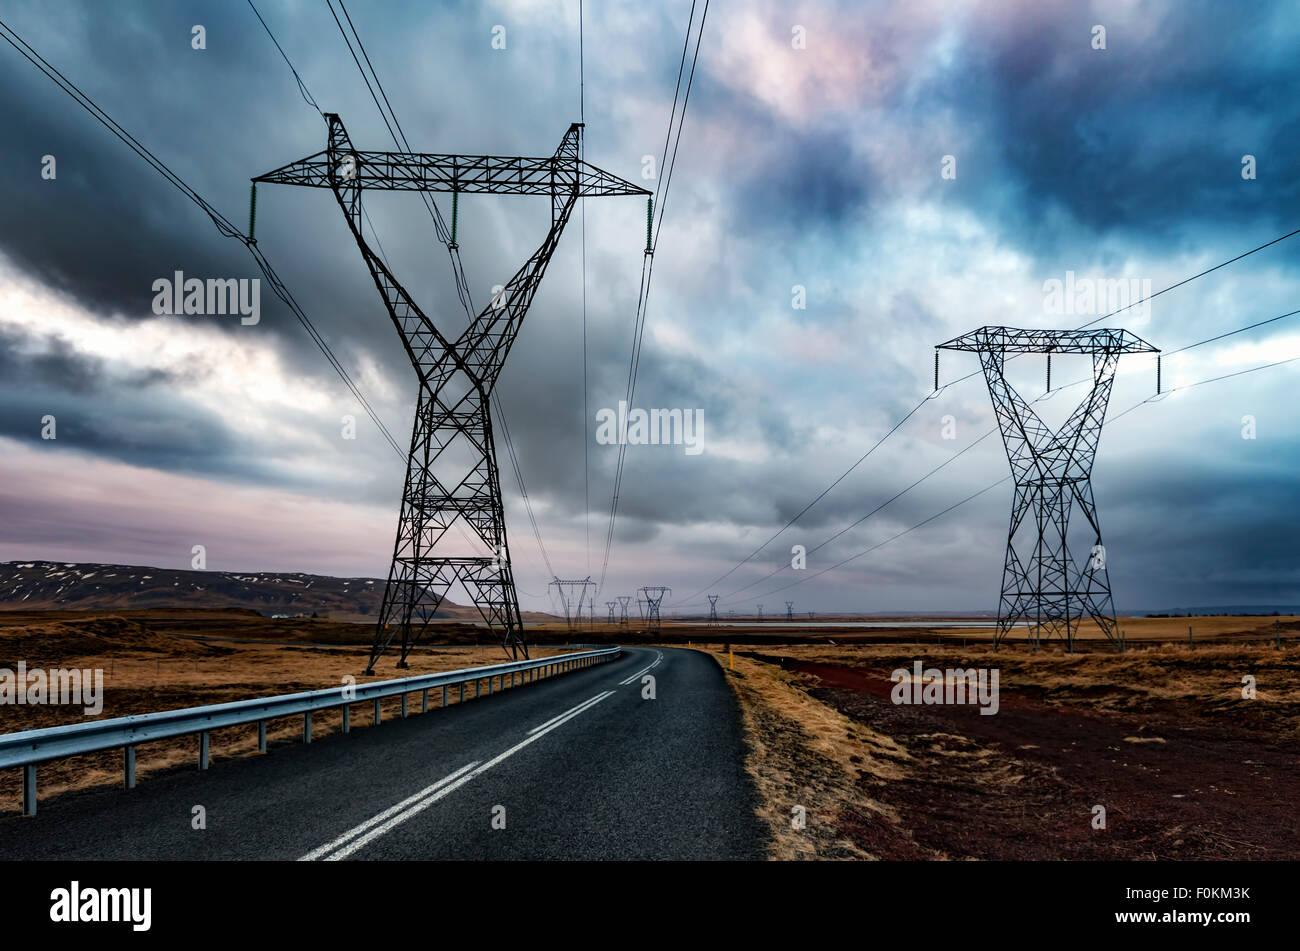 Iceland, Solheimar, Highway 354 and power poles Stock Photo